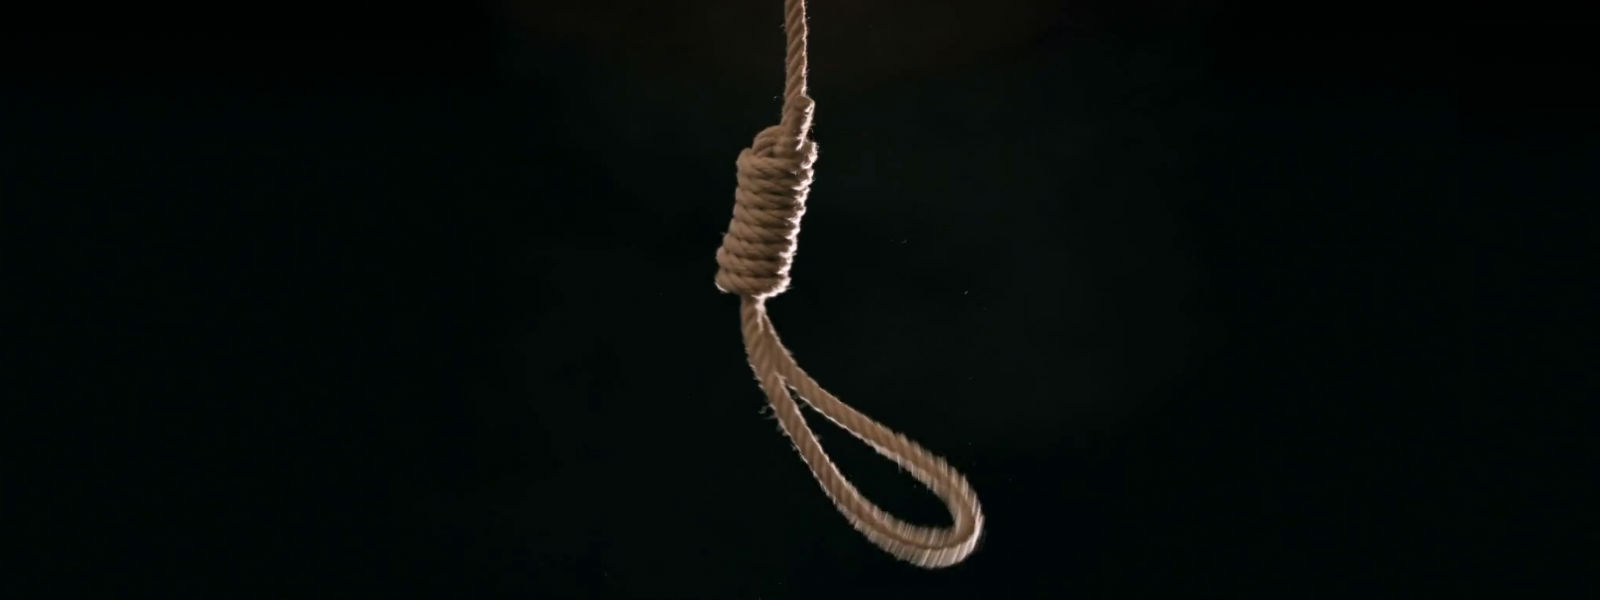 Noose is to be imported from overseas